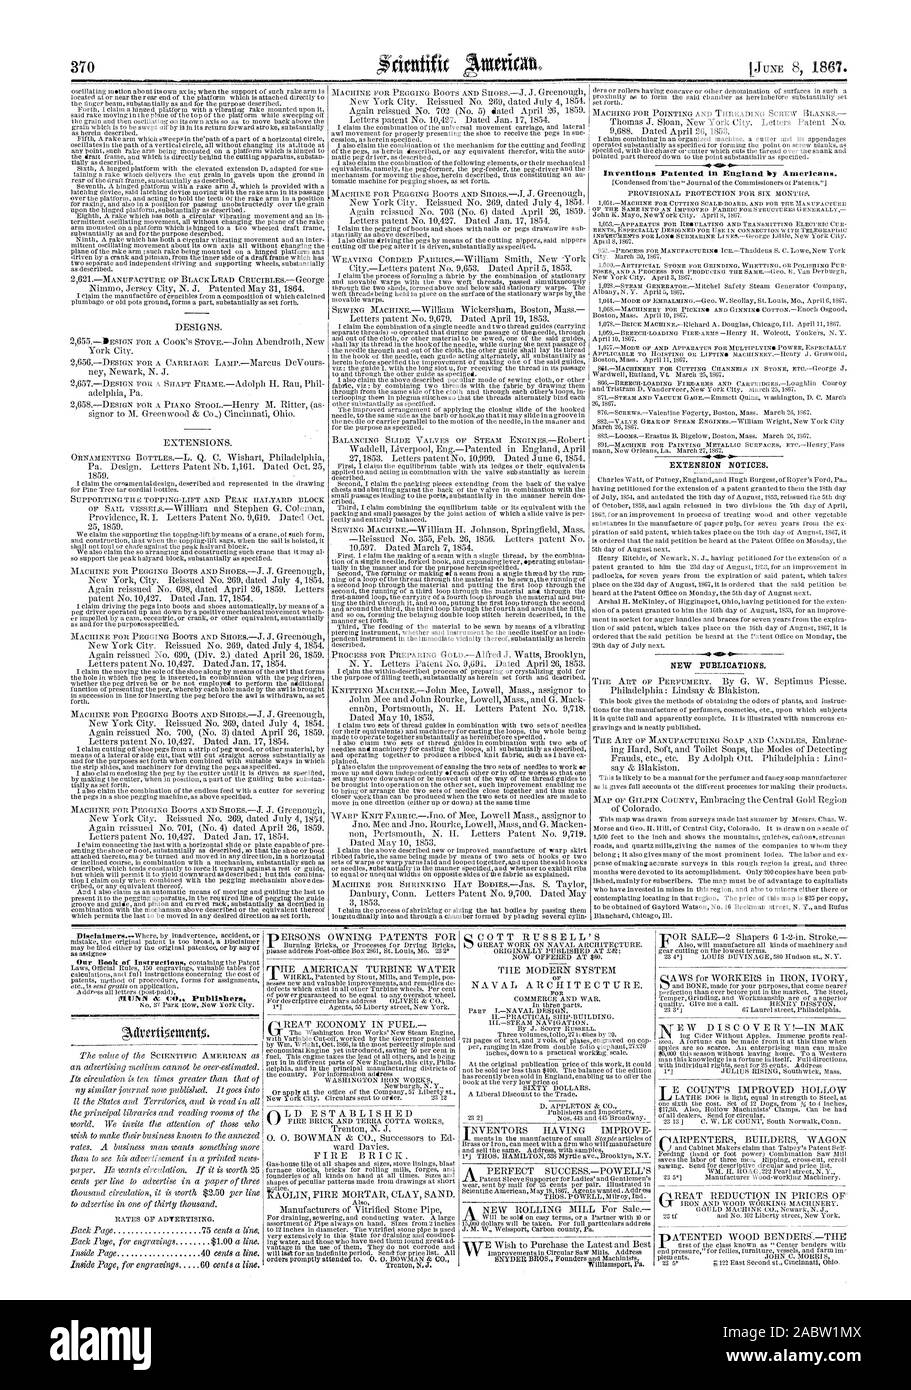 EXTENSION NOTICES. NEW PUBLICATIONS., scientific american, 1867-06-08 Stock Photo